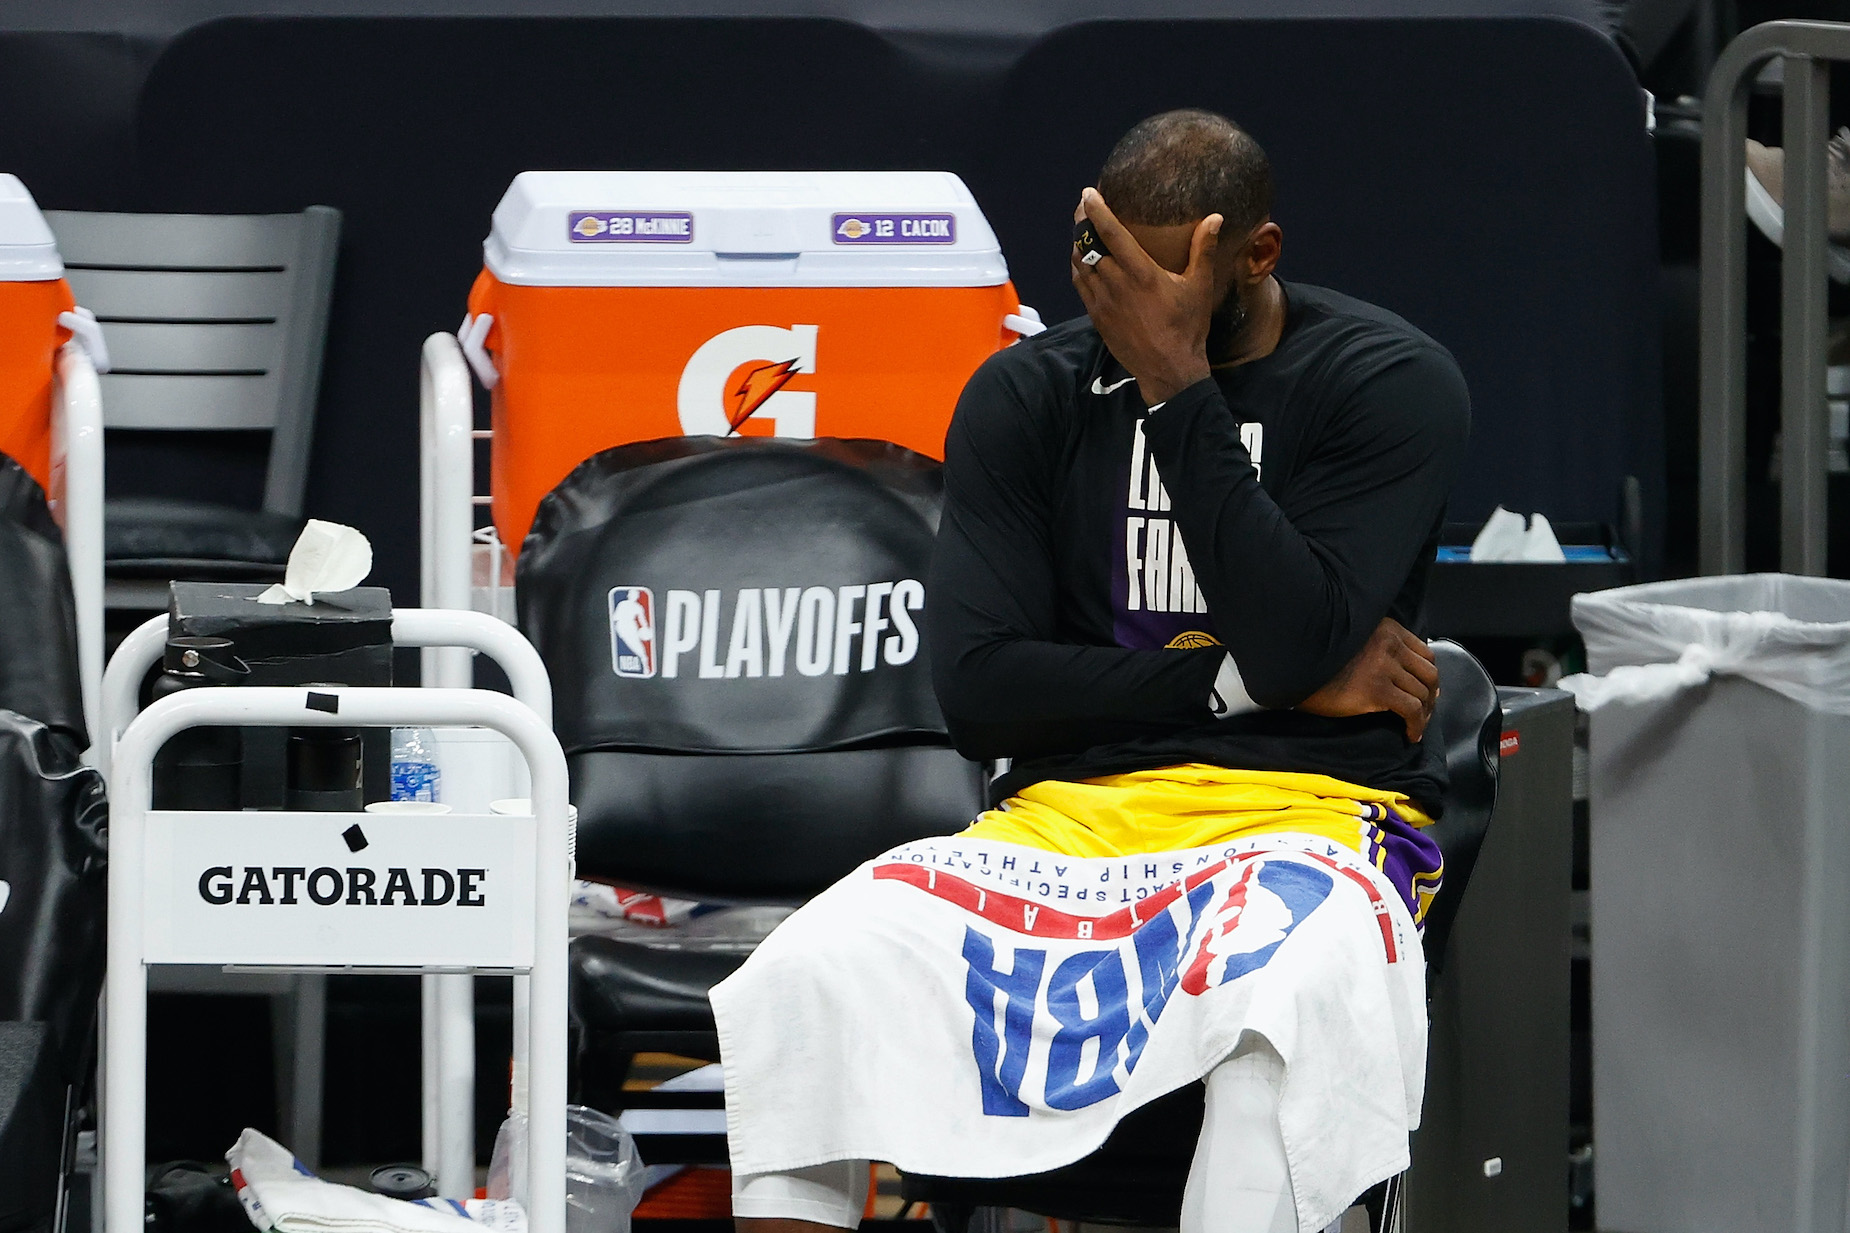 LeBron James and his LA Lakers are facing a first-round elimination from the playoffs.